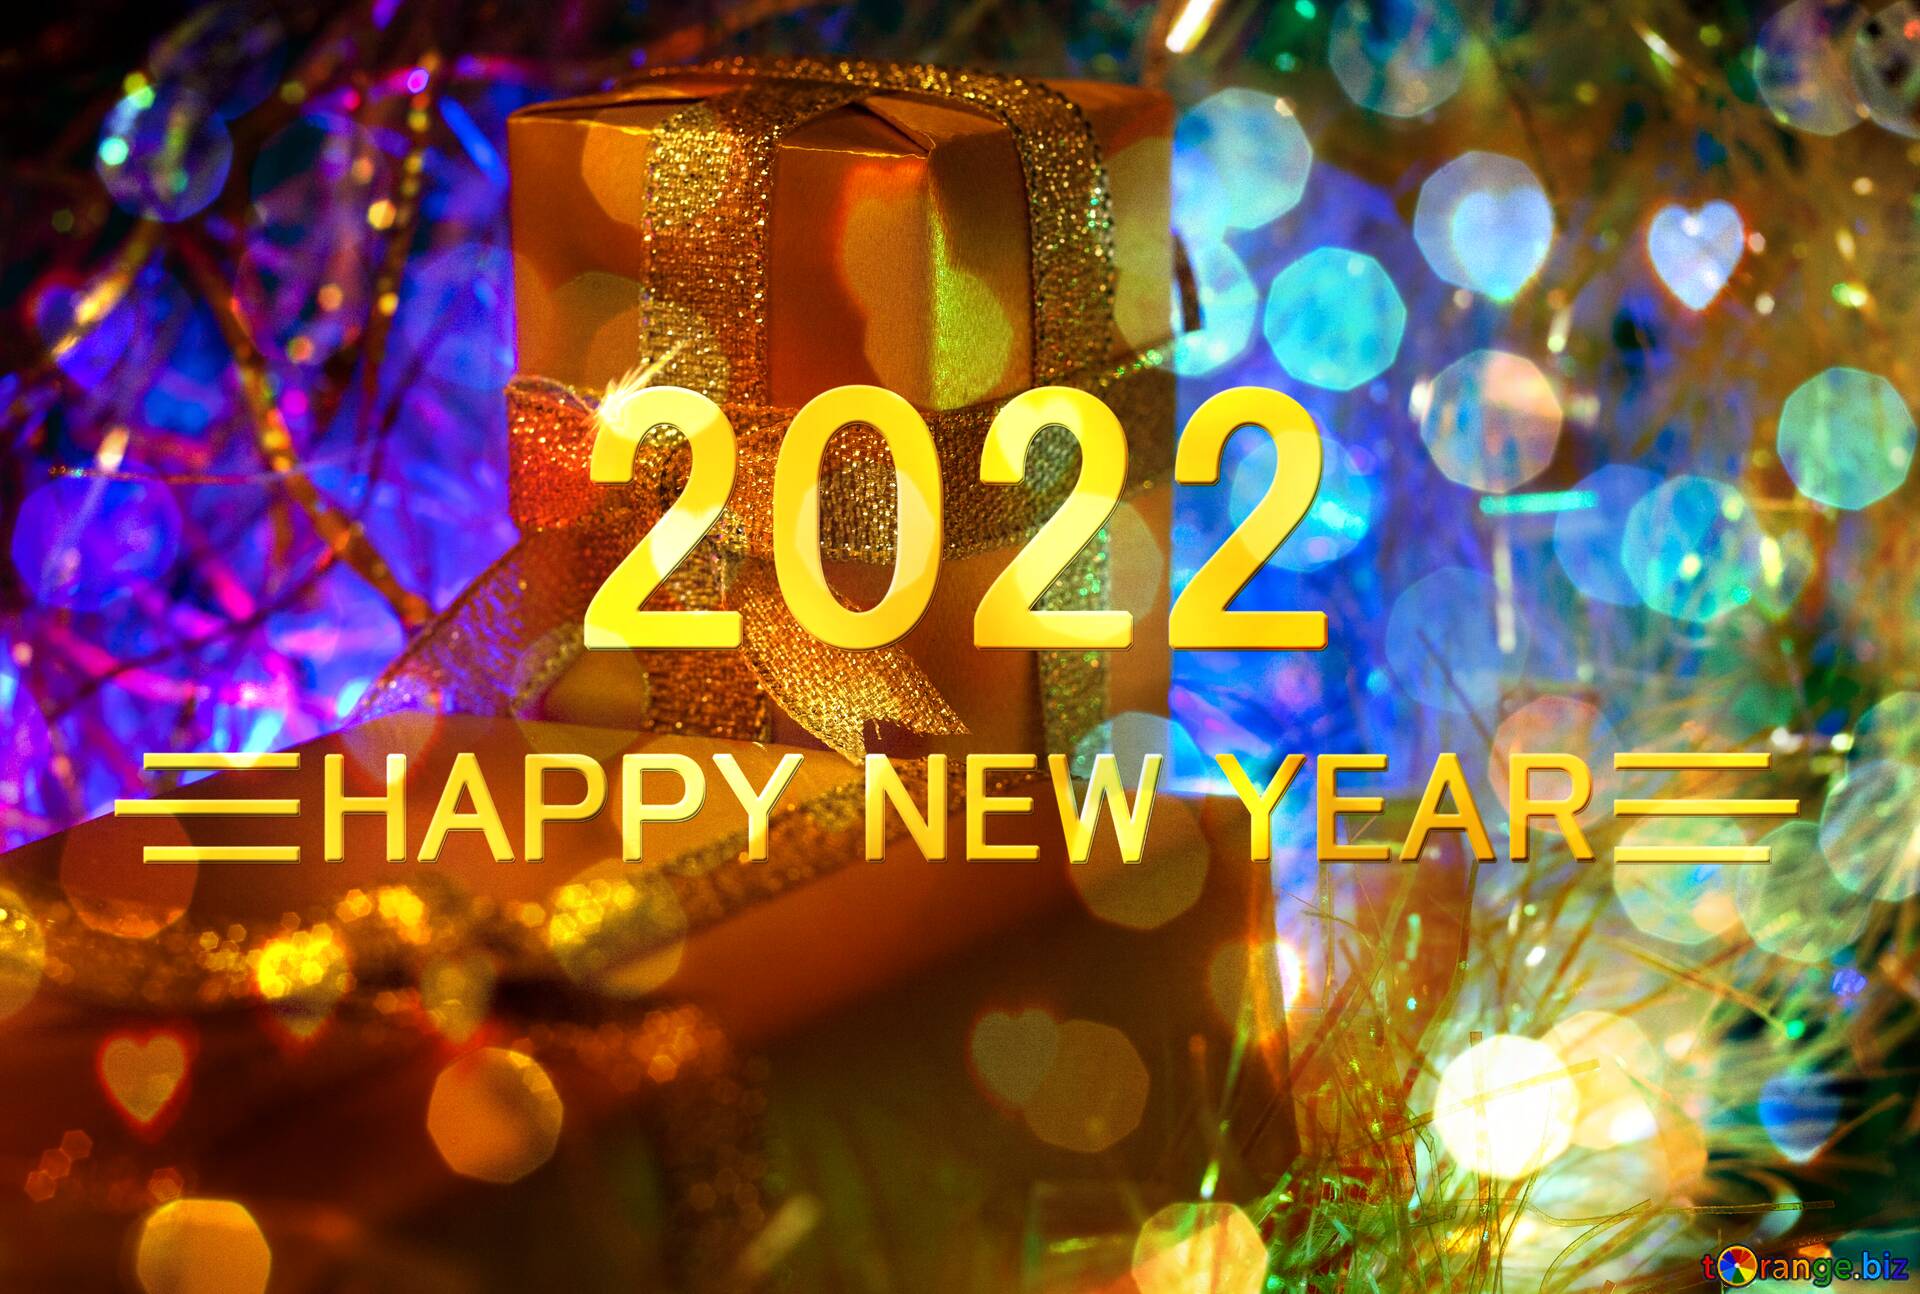 Download free picture Gifts Boxes Background Happy New Year 2022 on CC